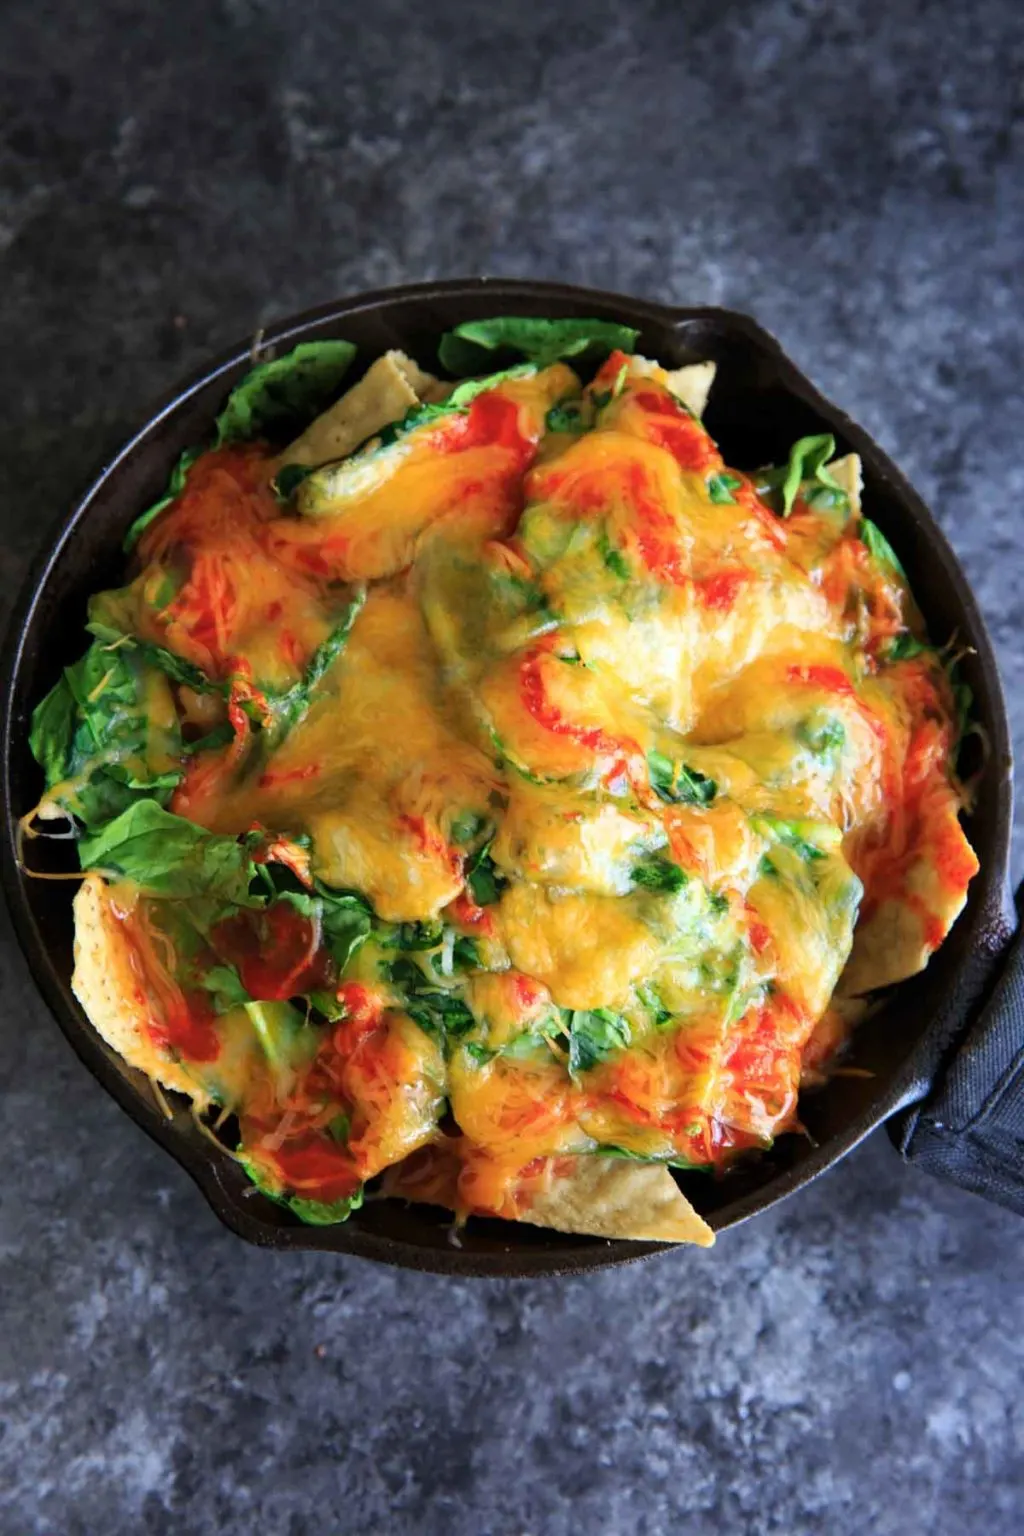 Oven-baked spinach nachos in a cast iron skillet. A great party snack, meal for 2 (or 1!) that has a little extra nutrition with greens.